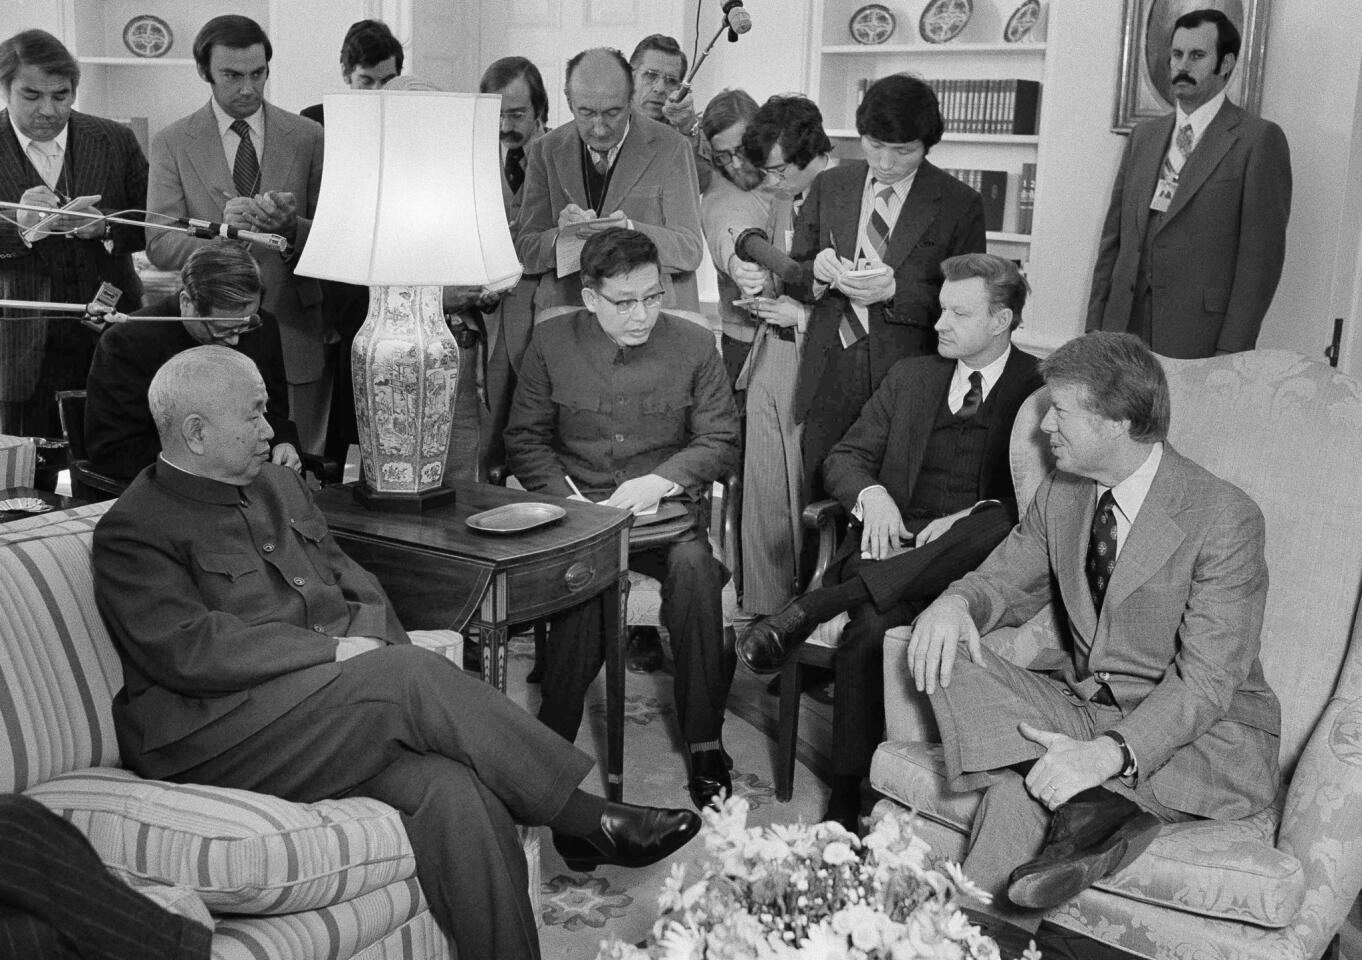 National security advisor Zbigniew Brzezinski, seated second from right, sits in as Huang Chen, chief of China's liaison office, left, meets with President Carter, right, in the Oval Office on Feb. 8, 1977.